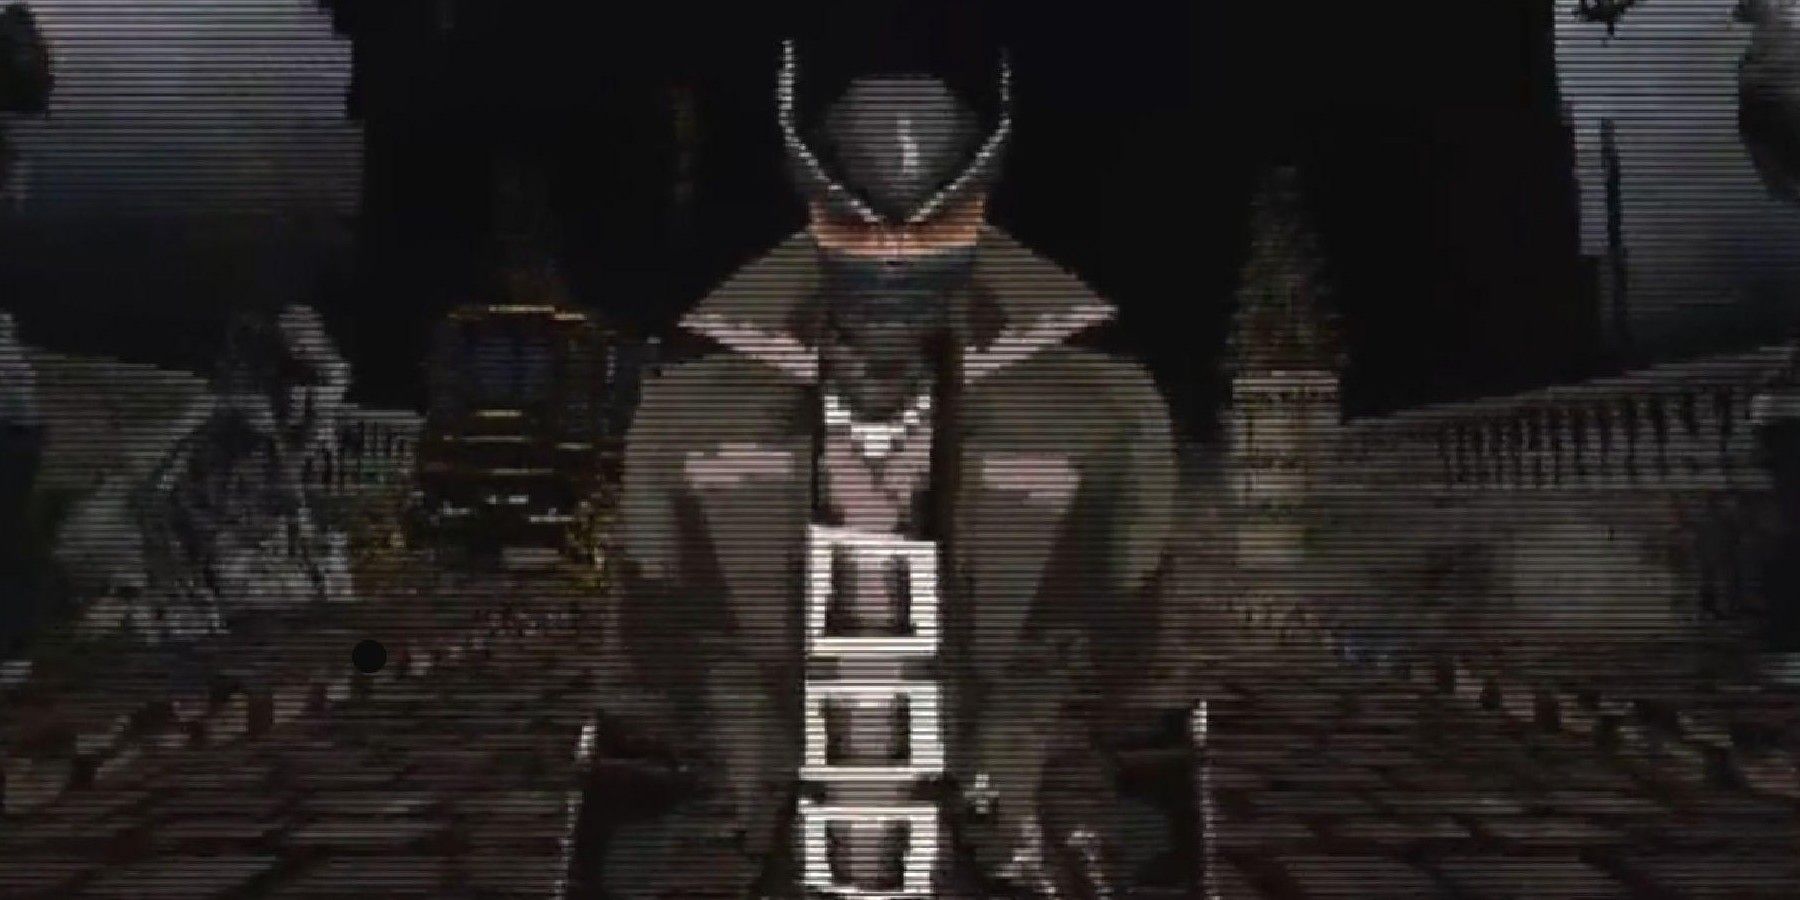 Bloodborne PSX is a demake of the original From Software game